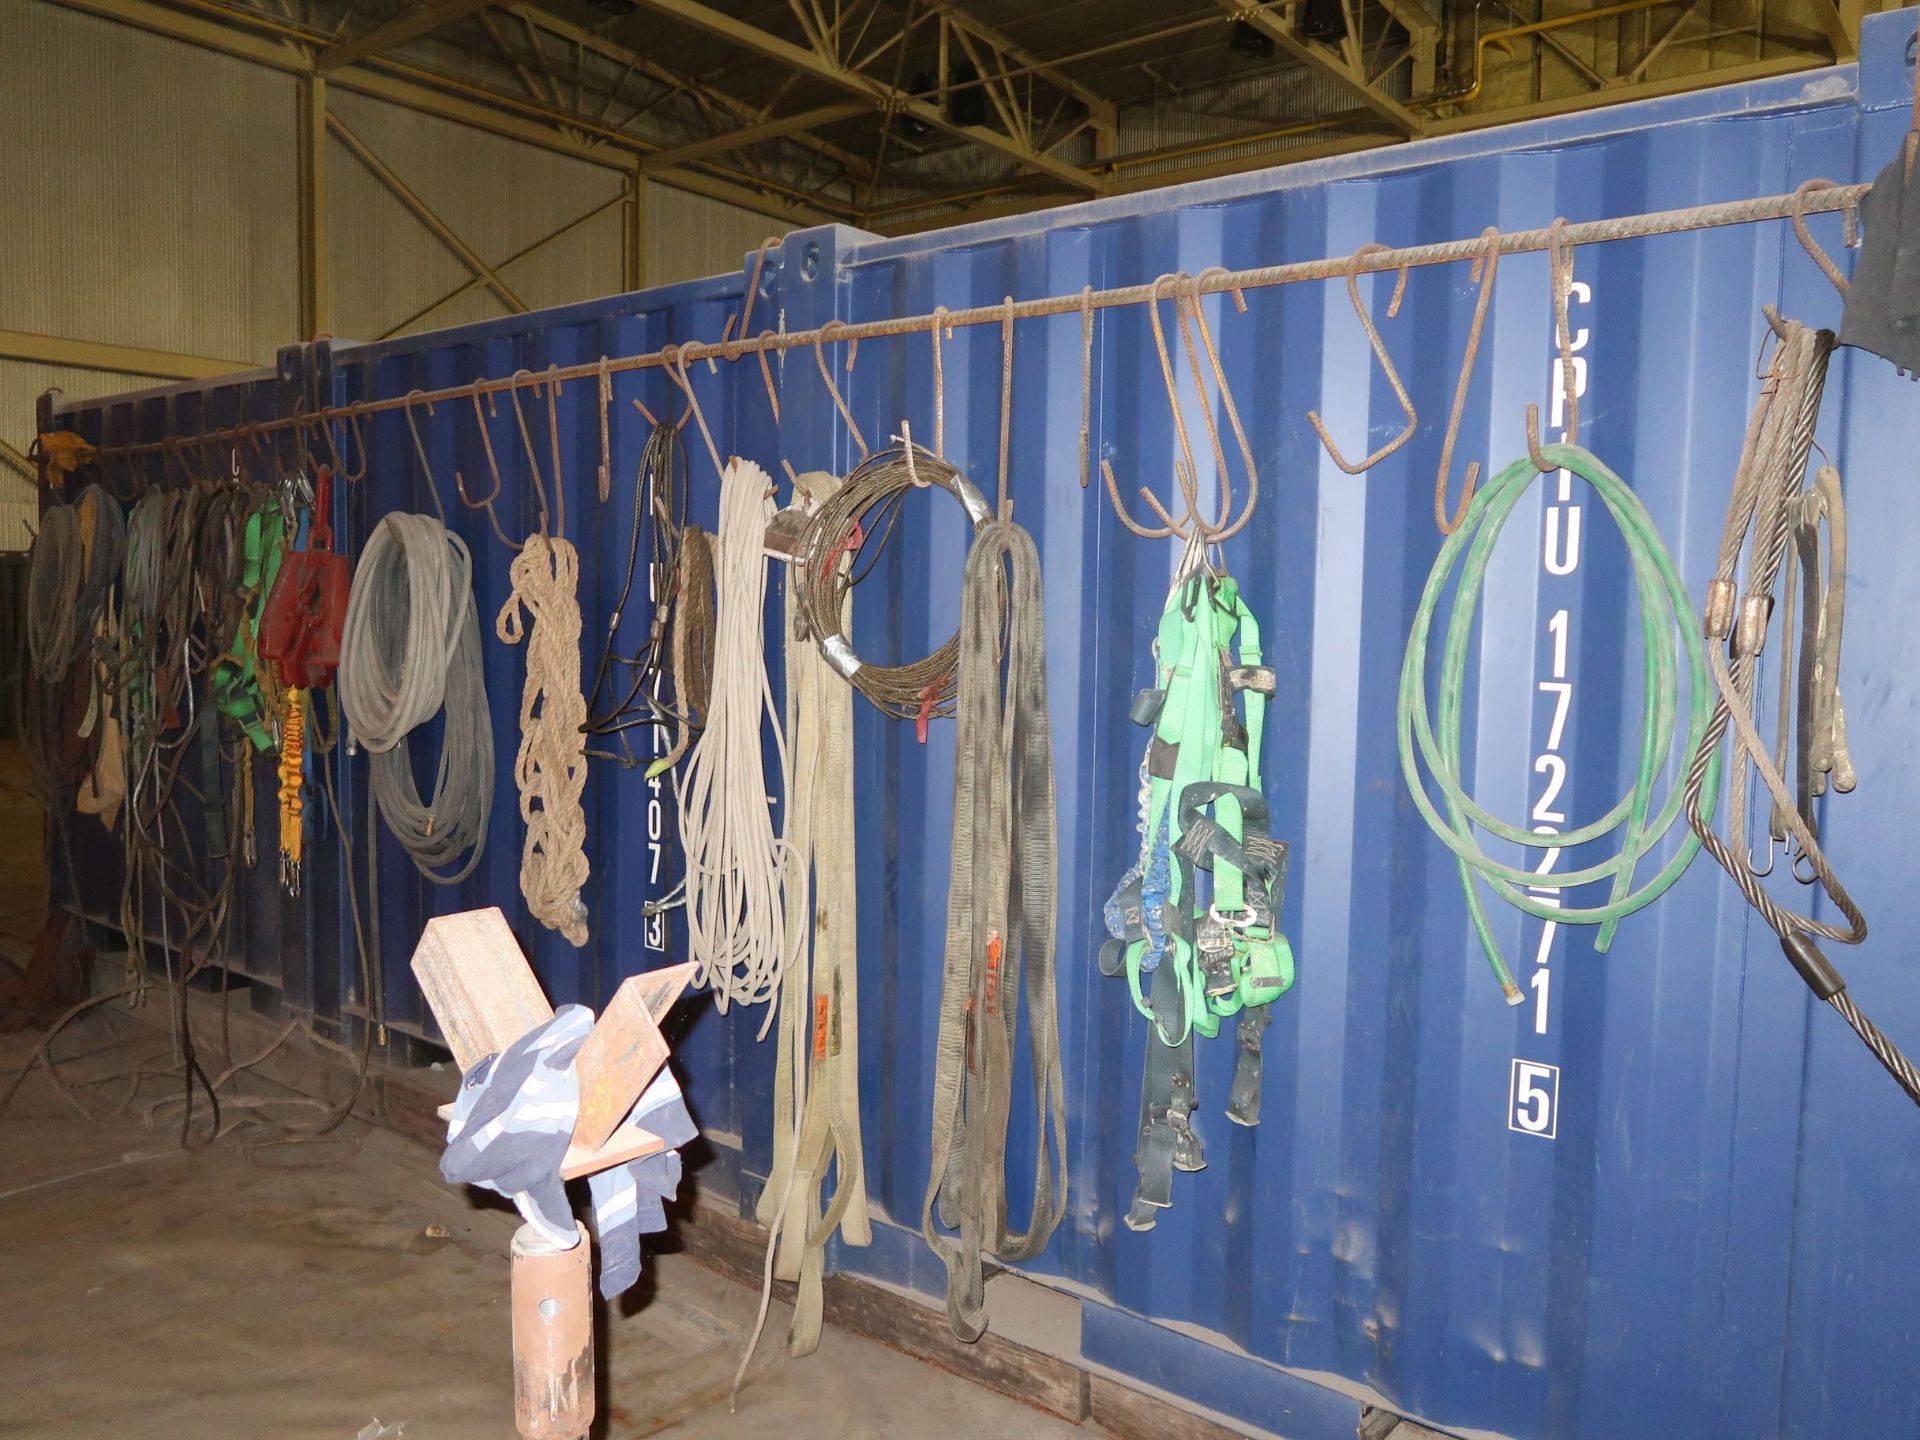 CONTENTS OF REAR OF CONTAINER INCLUDING HOSES, LIFTING STRAPS AND CABLES, SAFETY HARNESSES